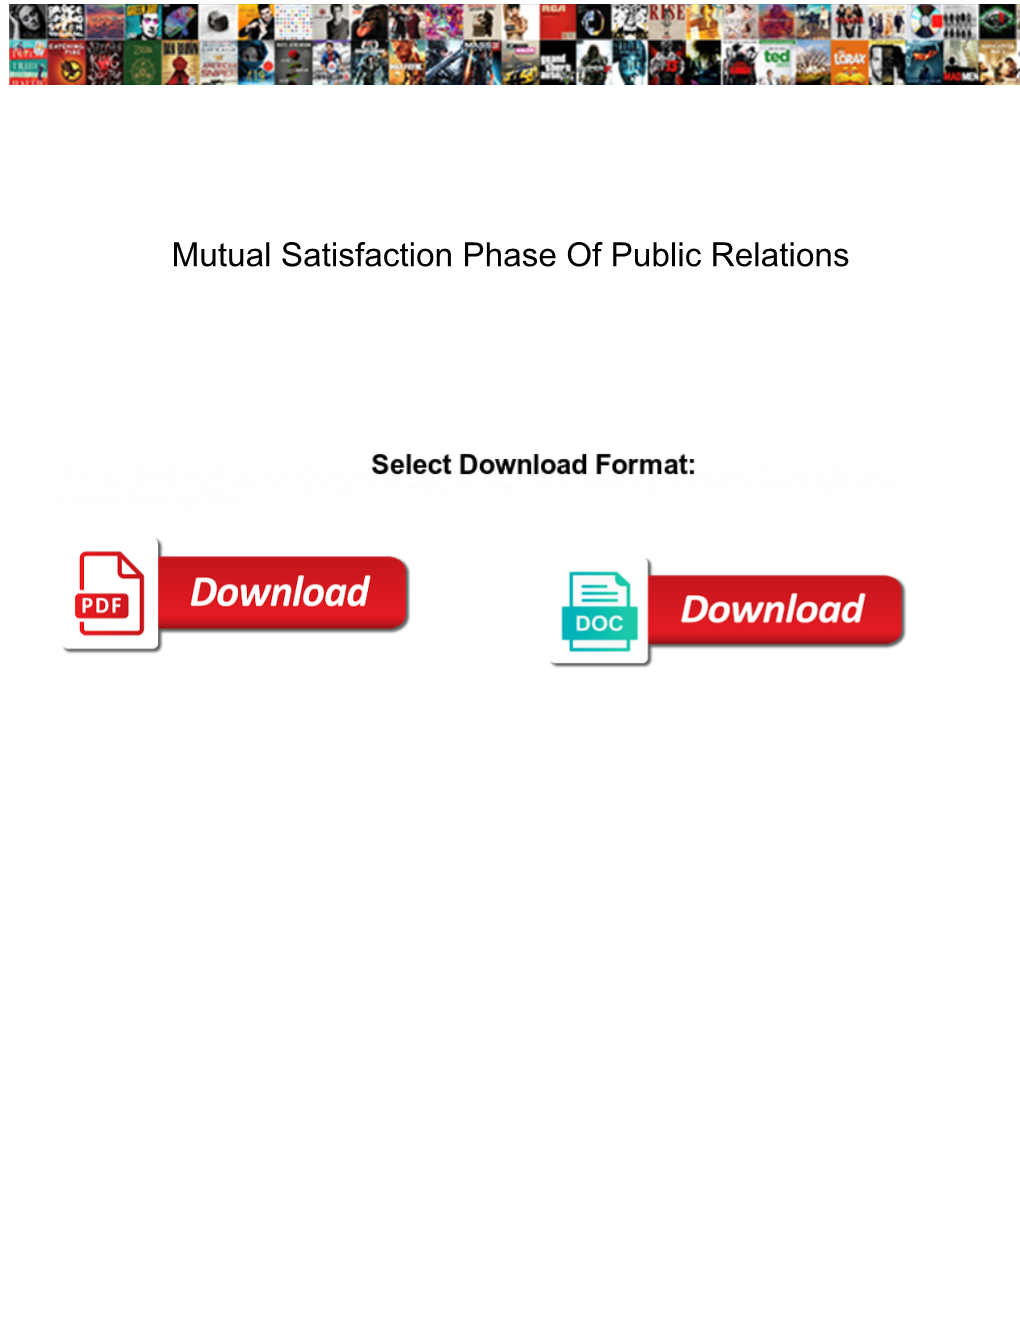 Mutual Satisfaction Phase of Public Relations